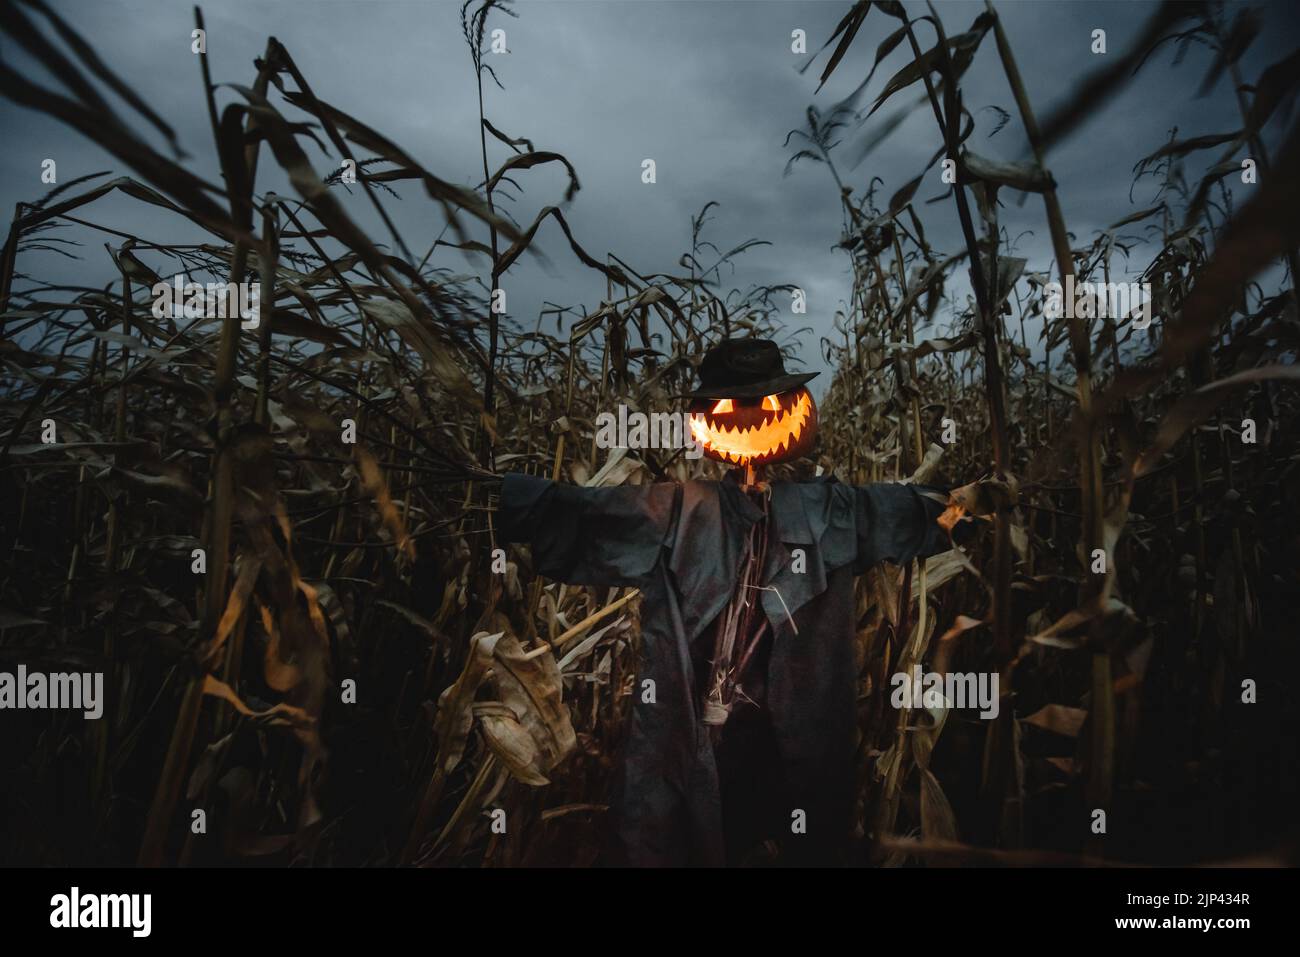 Scary scarecrow with pumpkin head in a hat and coat on night cornfield. Spooky Halloween holiday concept. Halloweens background Stock Photo